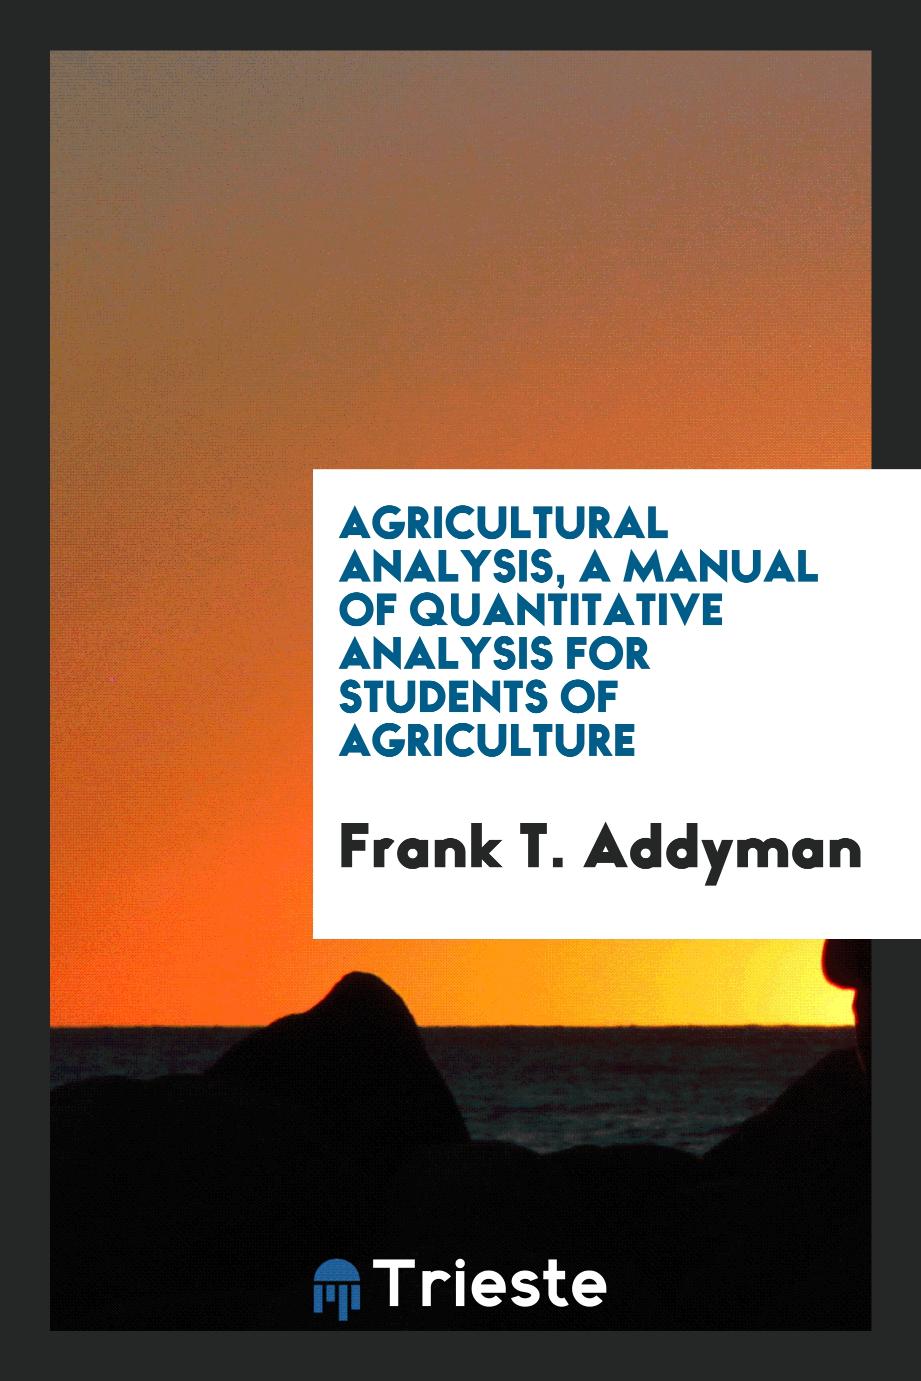 Agricultural analysis, a manual of quantitative analysis for students of agriculture